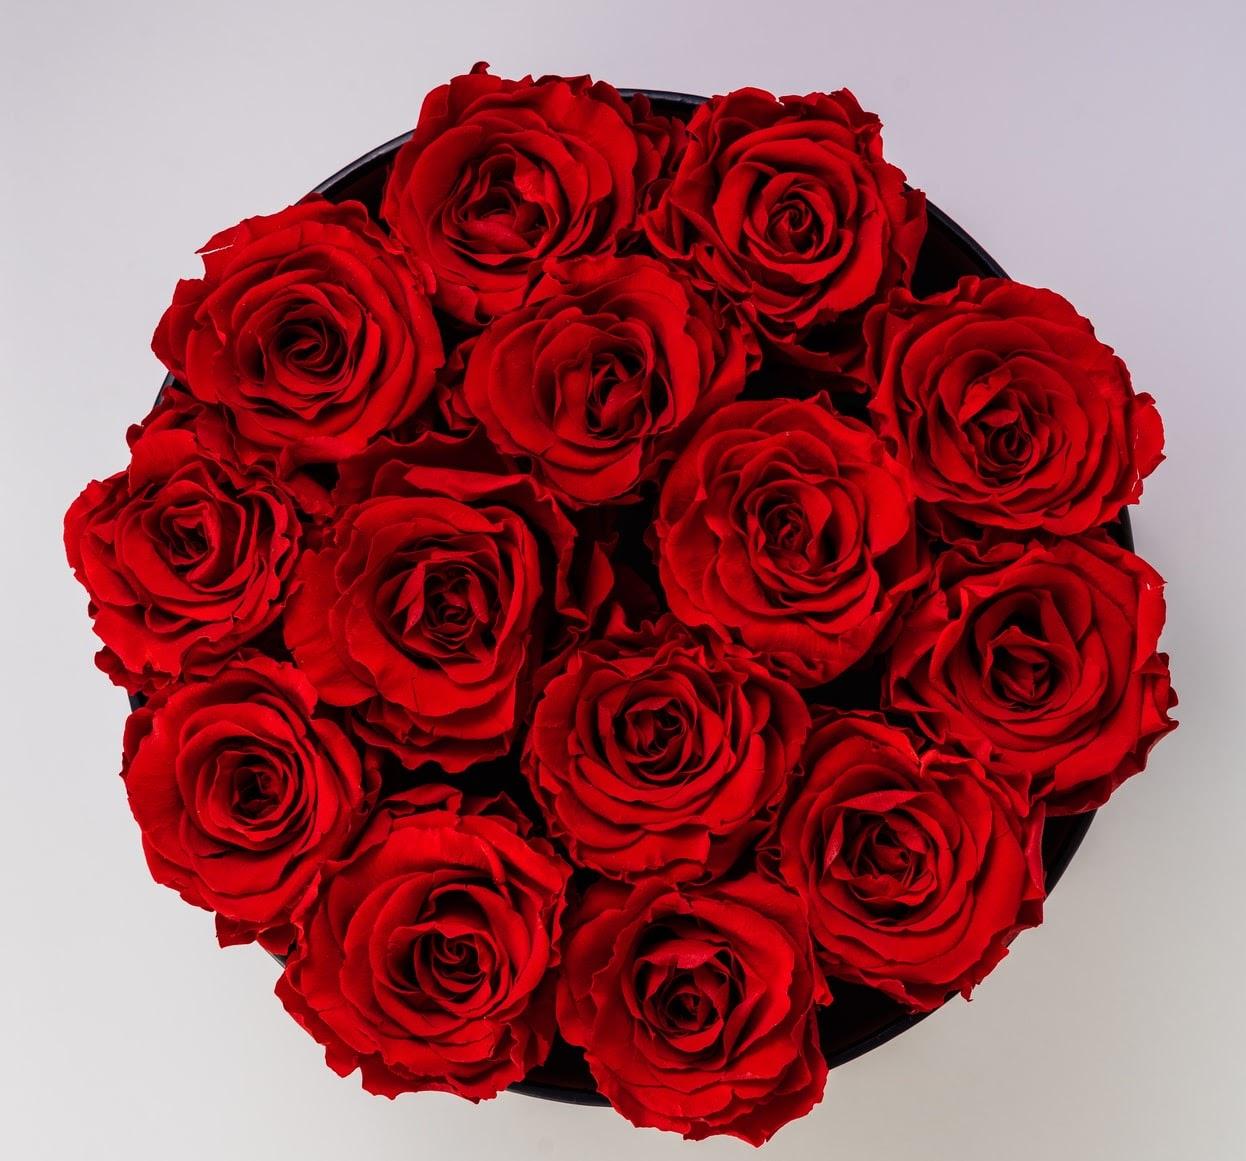 A bouquet of beautiful red roses